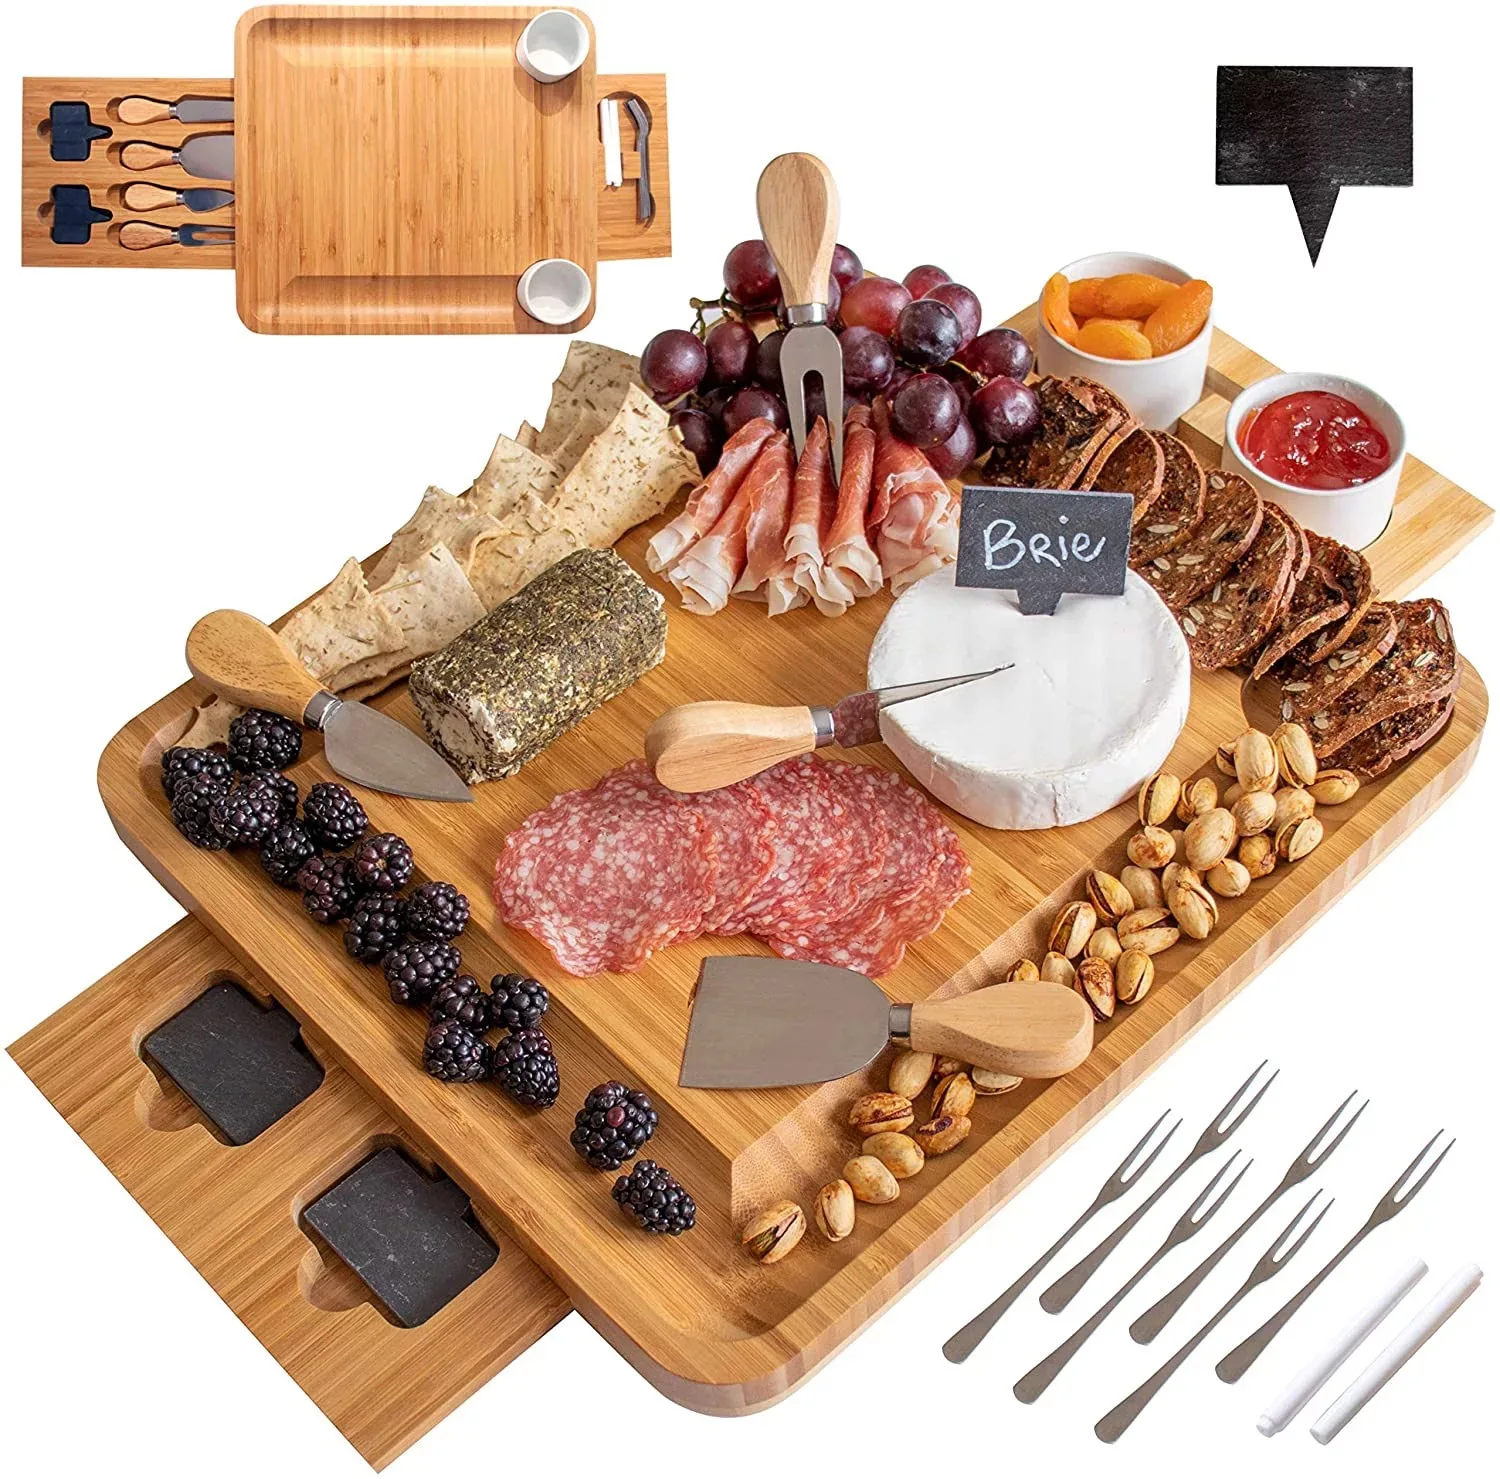 

Natural Wood Charcuterie Bamboo Cheese Board With Knife Set, Cutlery and Accessories